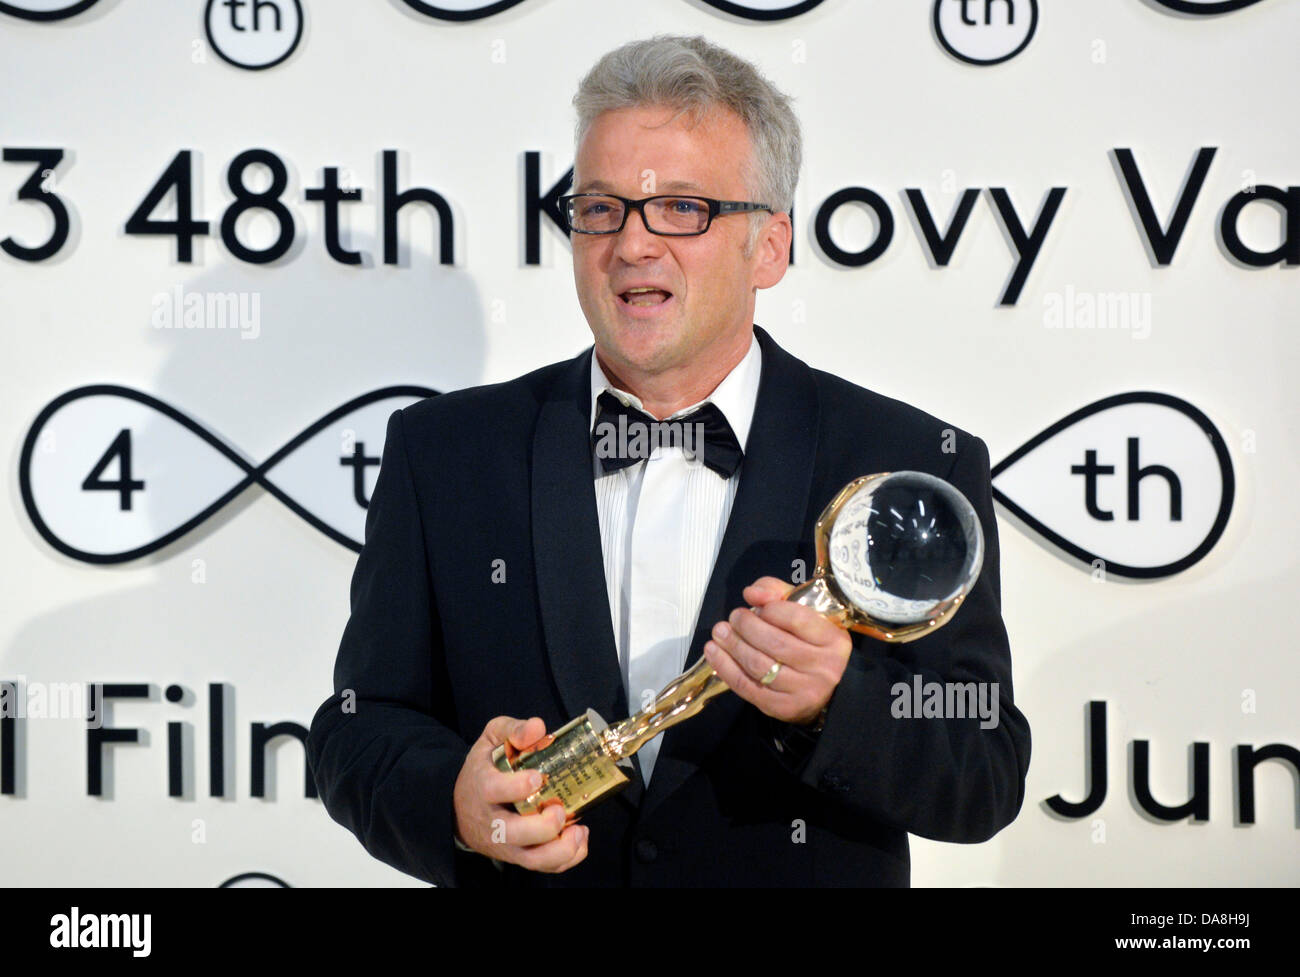 Karlovy Vary, Czech Republic. 6th July, 2013. Producer Sandor Soth took over the Crystal Globe award for the best feature for Janos Szasz's movie Le grand cahier at the closing ceremony of the 48th Karlovy Vary International Film Festival in Karlovy Vary, Czech Republic, on Sunday, July 6, 2013. The winning film, Le grand cahier, shot in coproduction with Germany, Austria and France, is an adaptation of the first novel by Hungarian writer Agota Kristof, telling a story of 13-year-old twins forced to spend the last years of WWII with their cruel grandmother somewhere near the Hungarian border.  Stock Photo